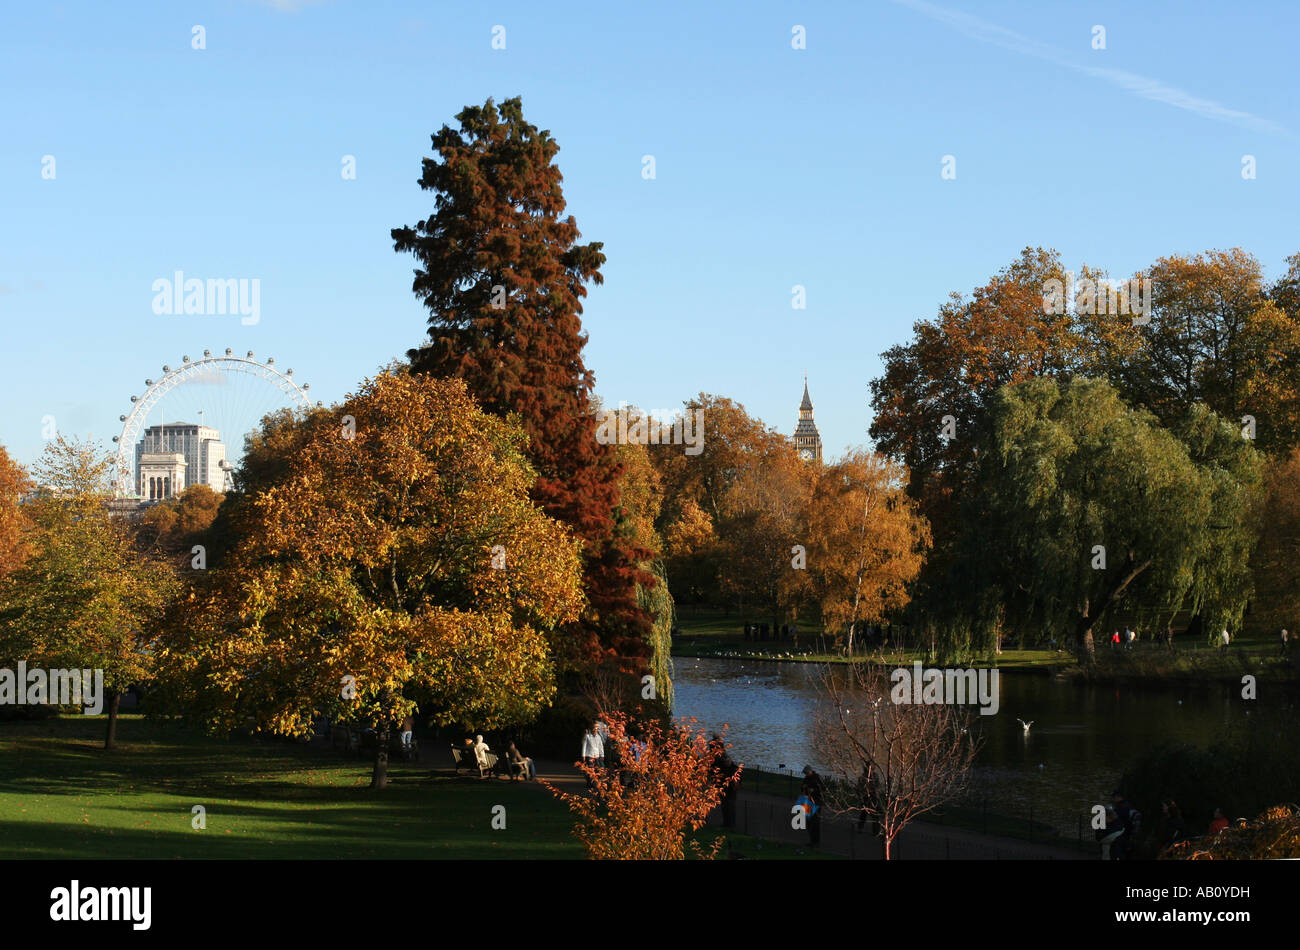 St James Park in London England on a bright autumn day with the London Eye in the background Stock Photo